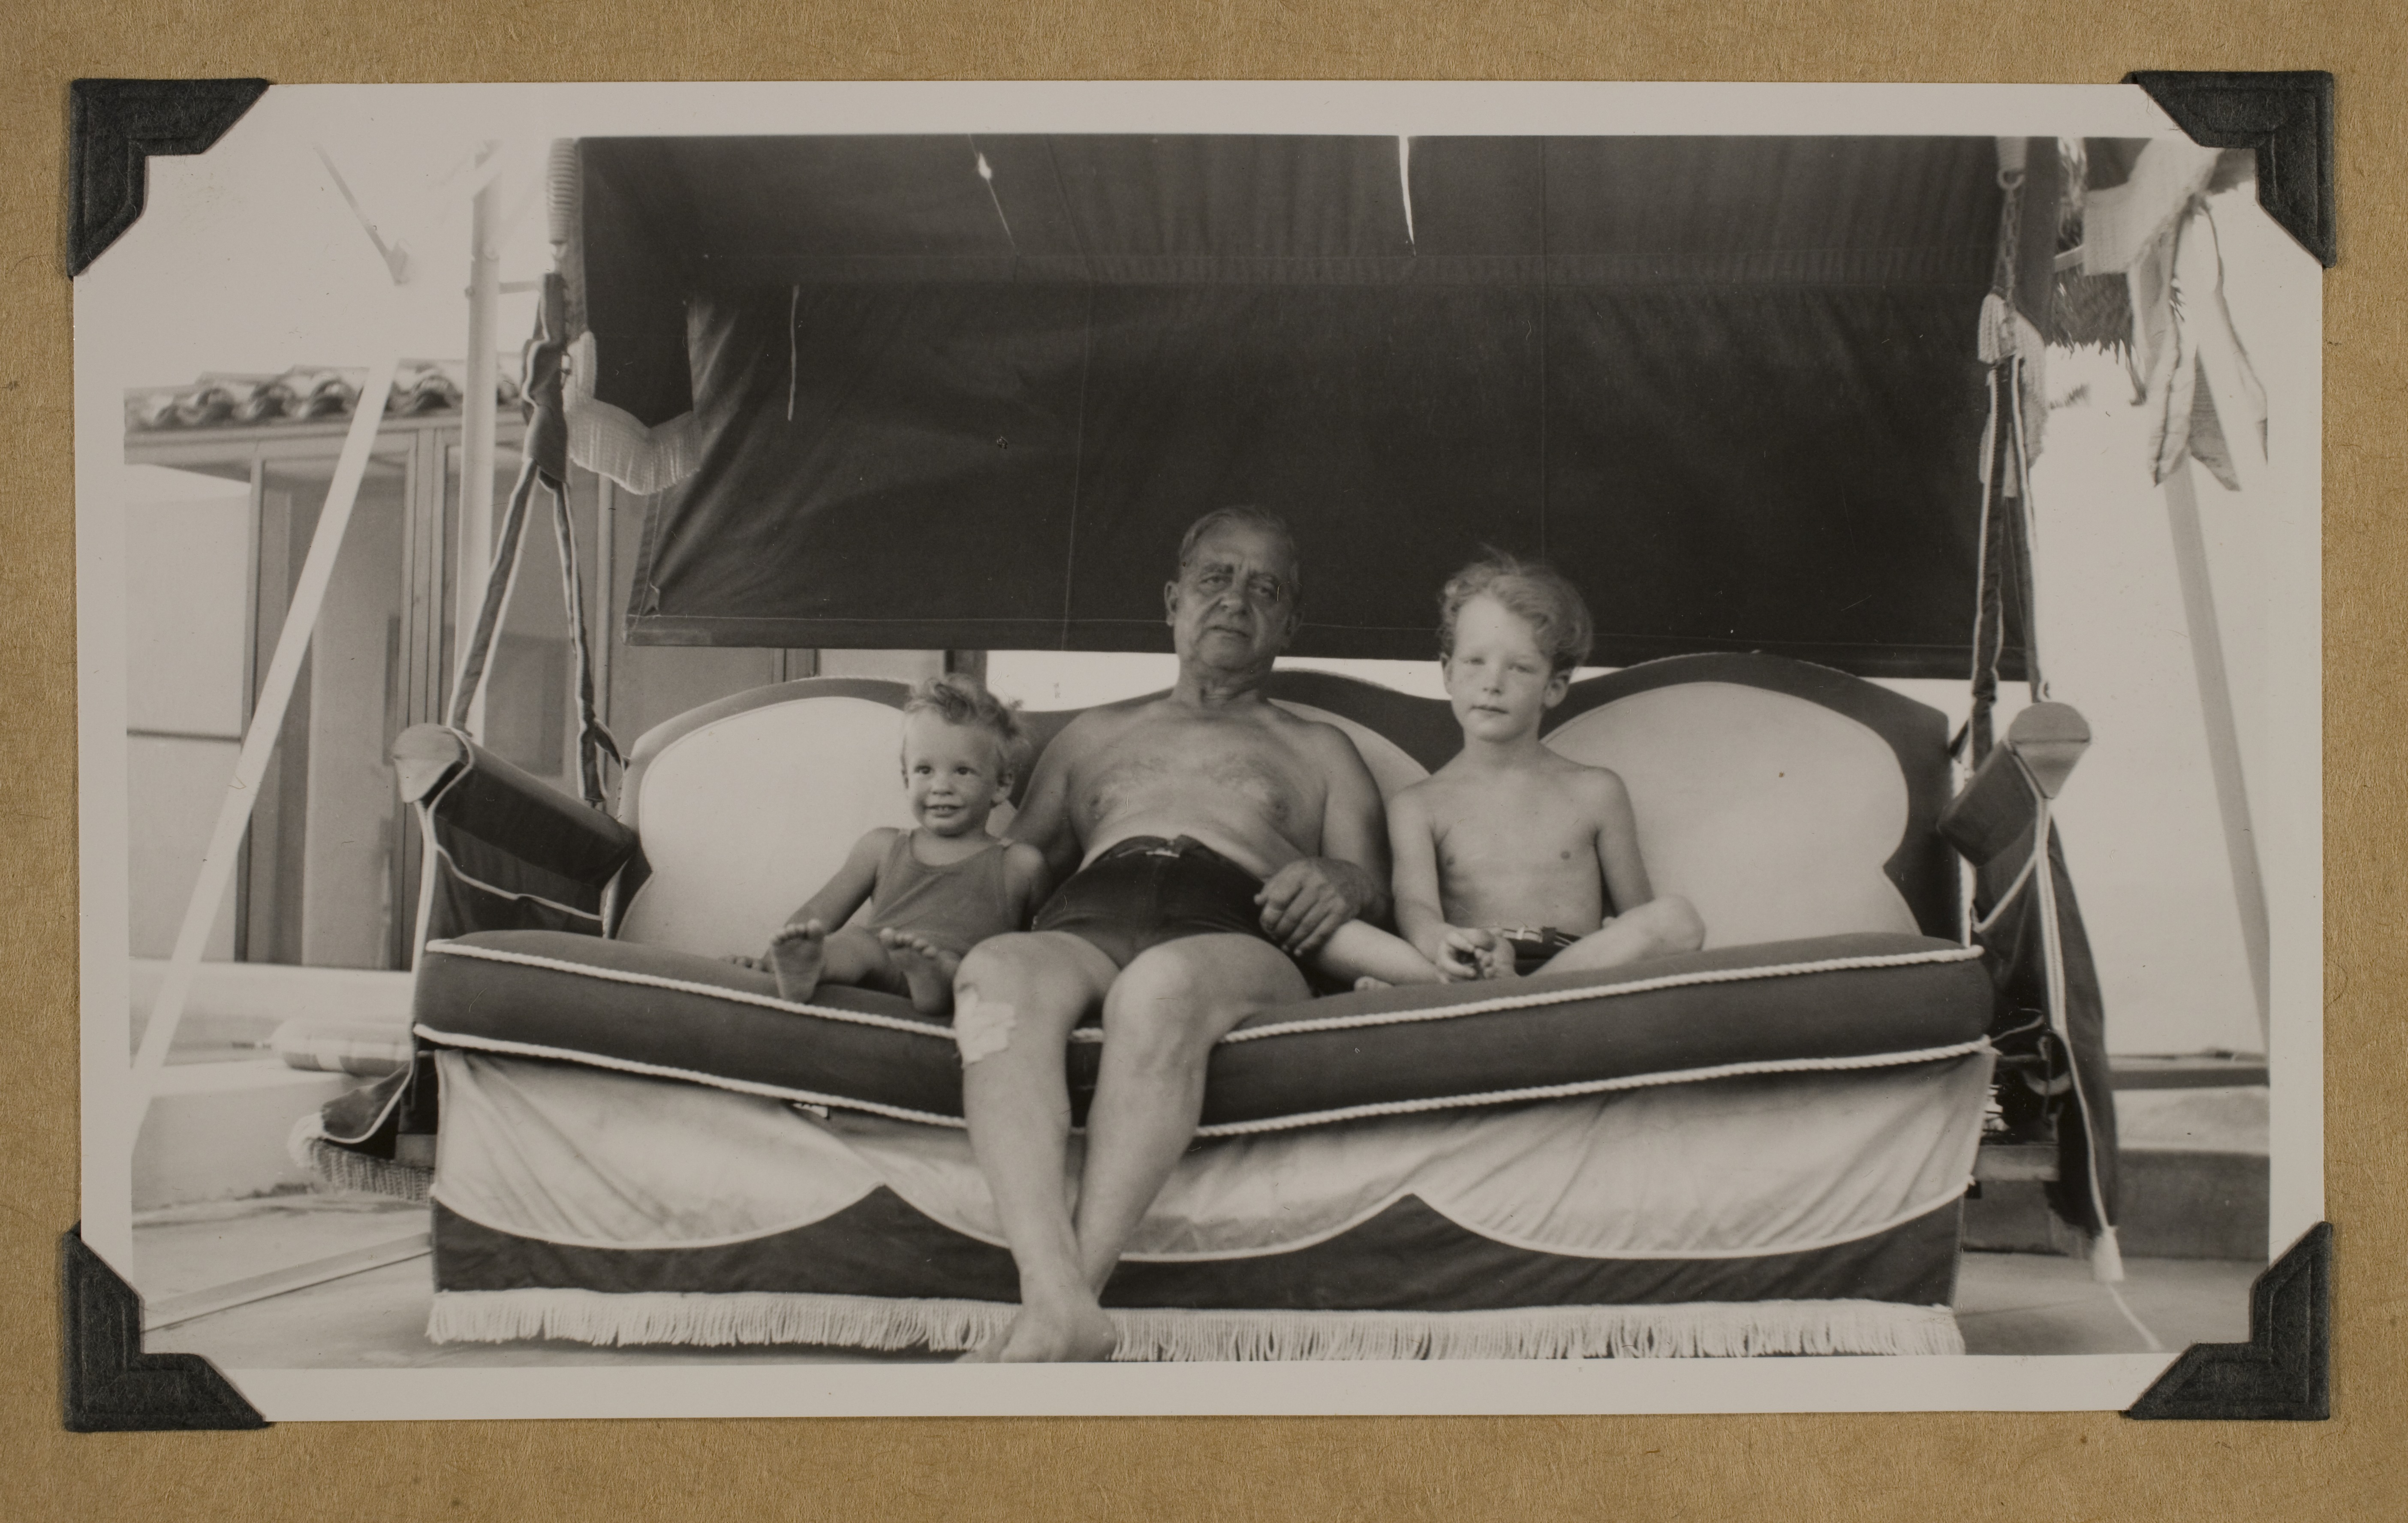 George Francis Robert Bell (left), Robert "King" Bow and Rex Anthony Bell, Jr (Toni Larbow Beldam) (right), George Francis Robert Bell at pool at ranch house at Walking Box Ranch: photographic print